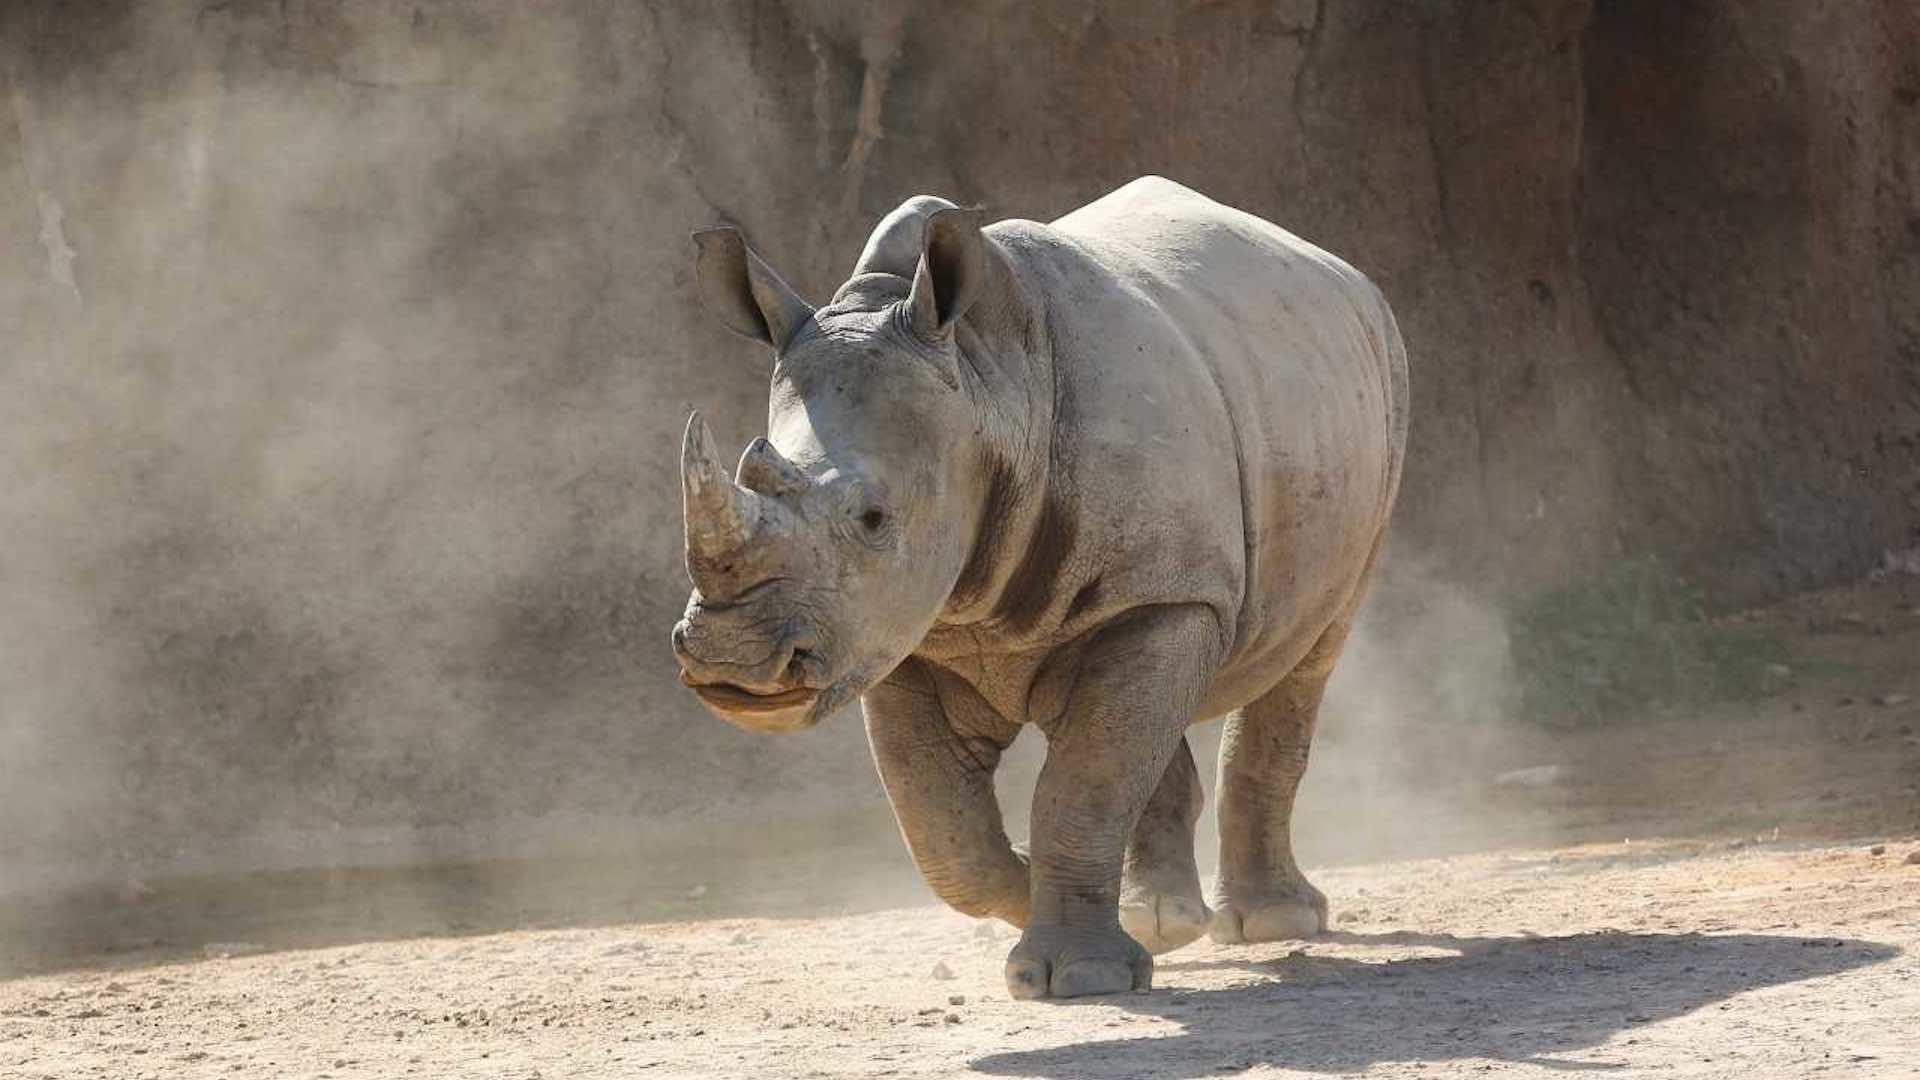 Significant step in species conservation: Rhinoceros birth at Al Ain Zoo